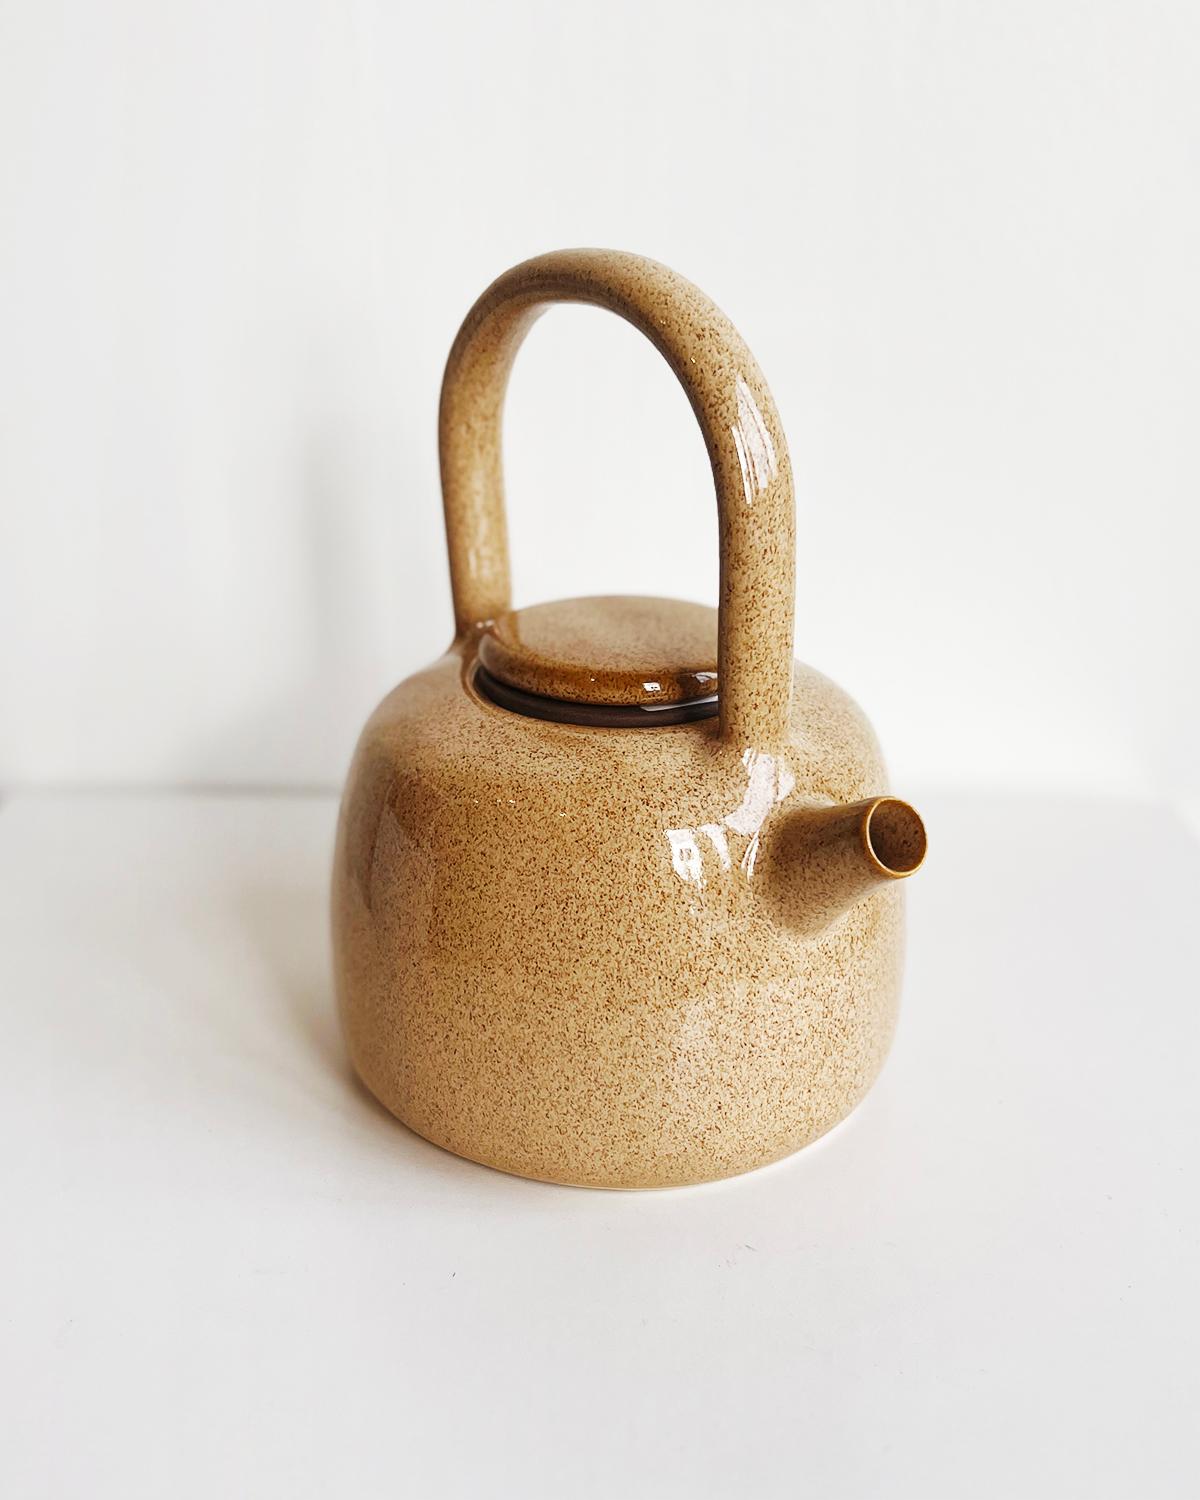 Contemporary Caramel Beige Speckled Handmade Stoneware Teapot For Sale